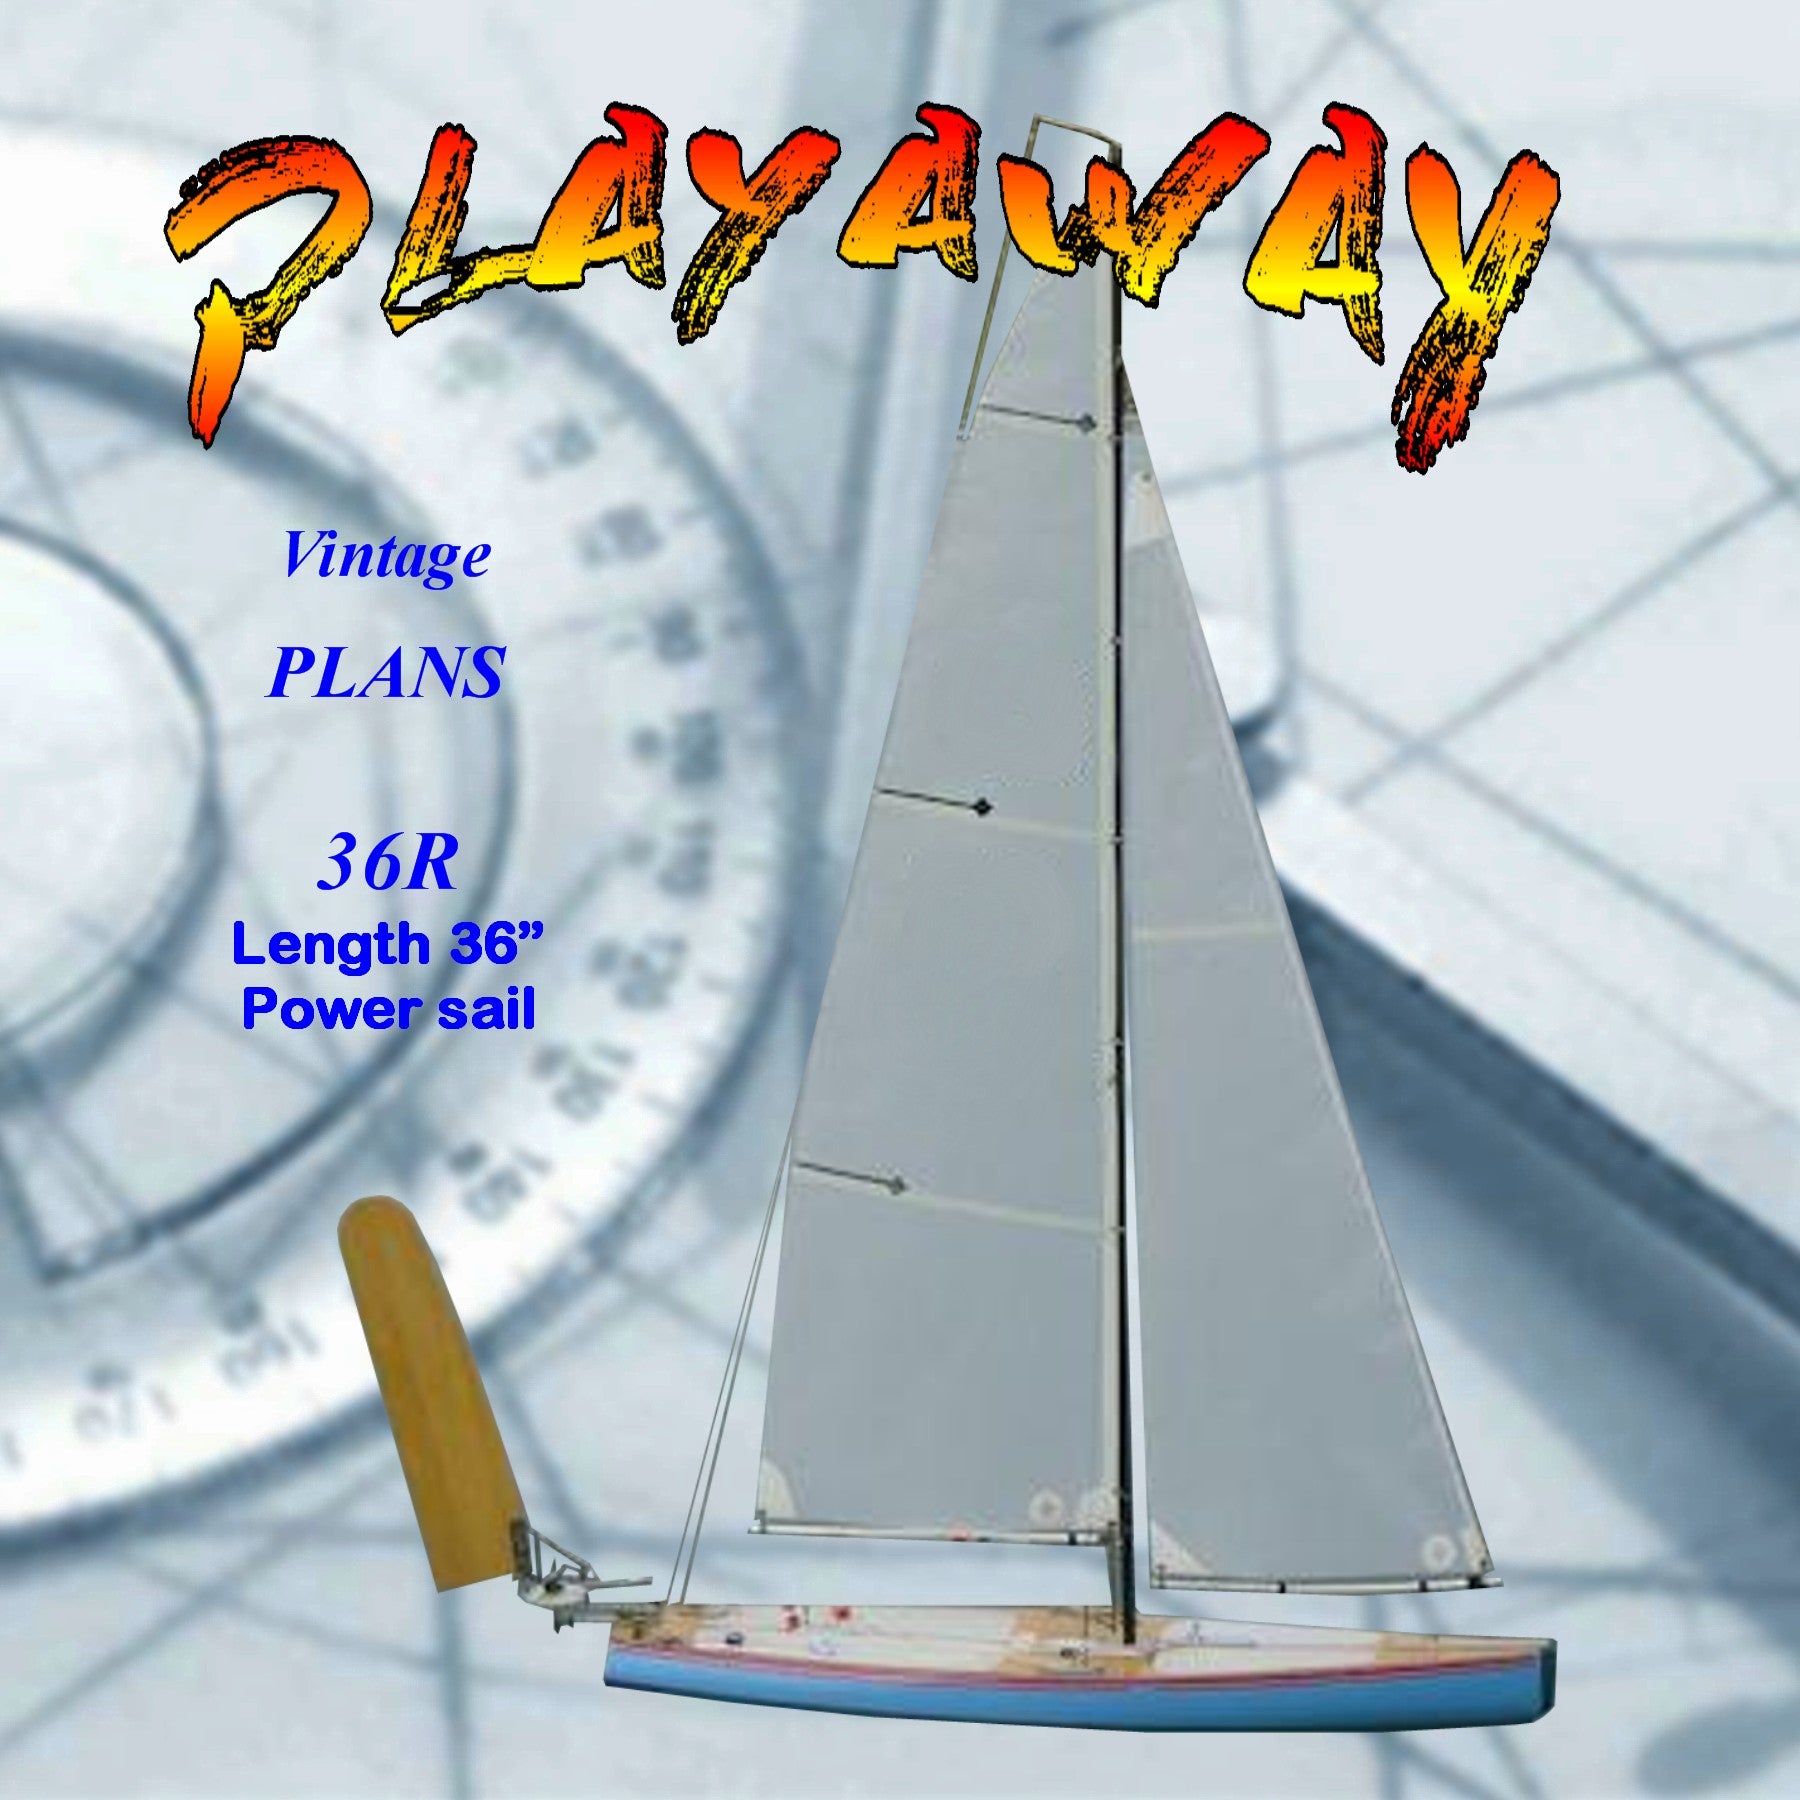 full size printed plans 36 r sailboat class  control vane or suitable for radio control